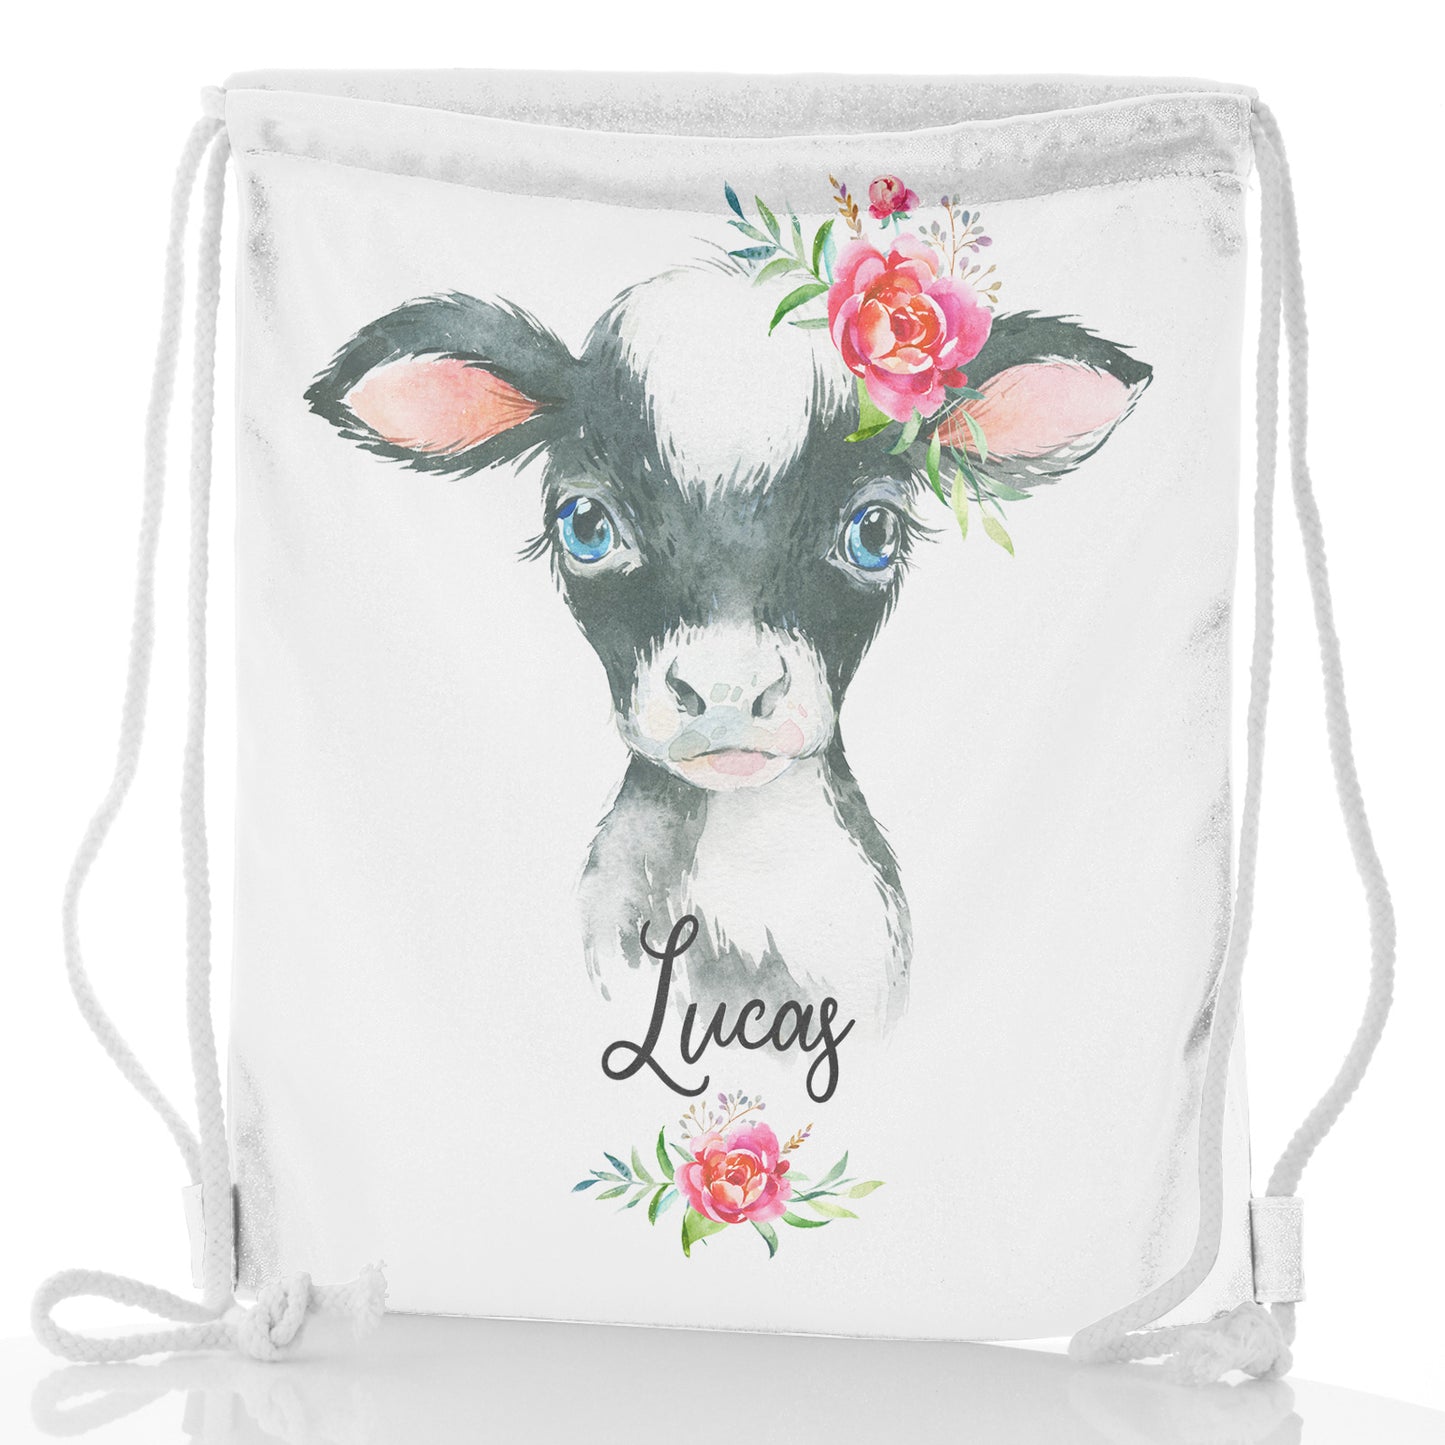 Personalised Glitter Drawstring Backpack with Black and White Cow Pink Rose Flowers and Cute Text